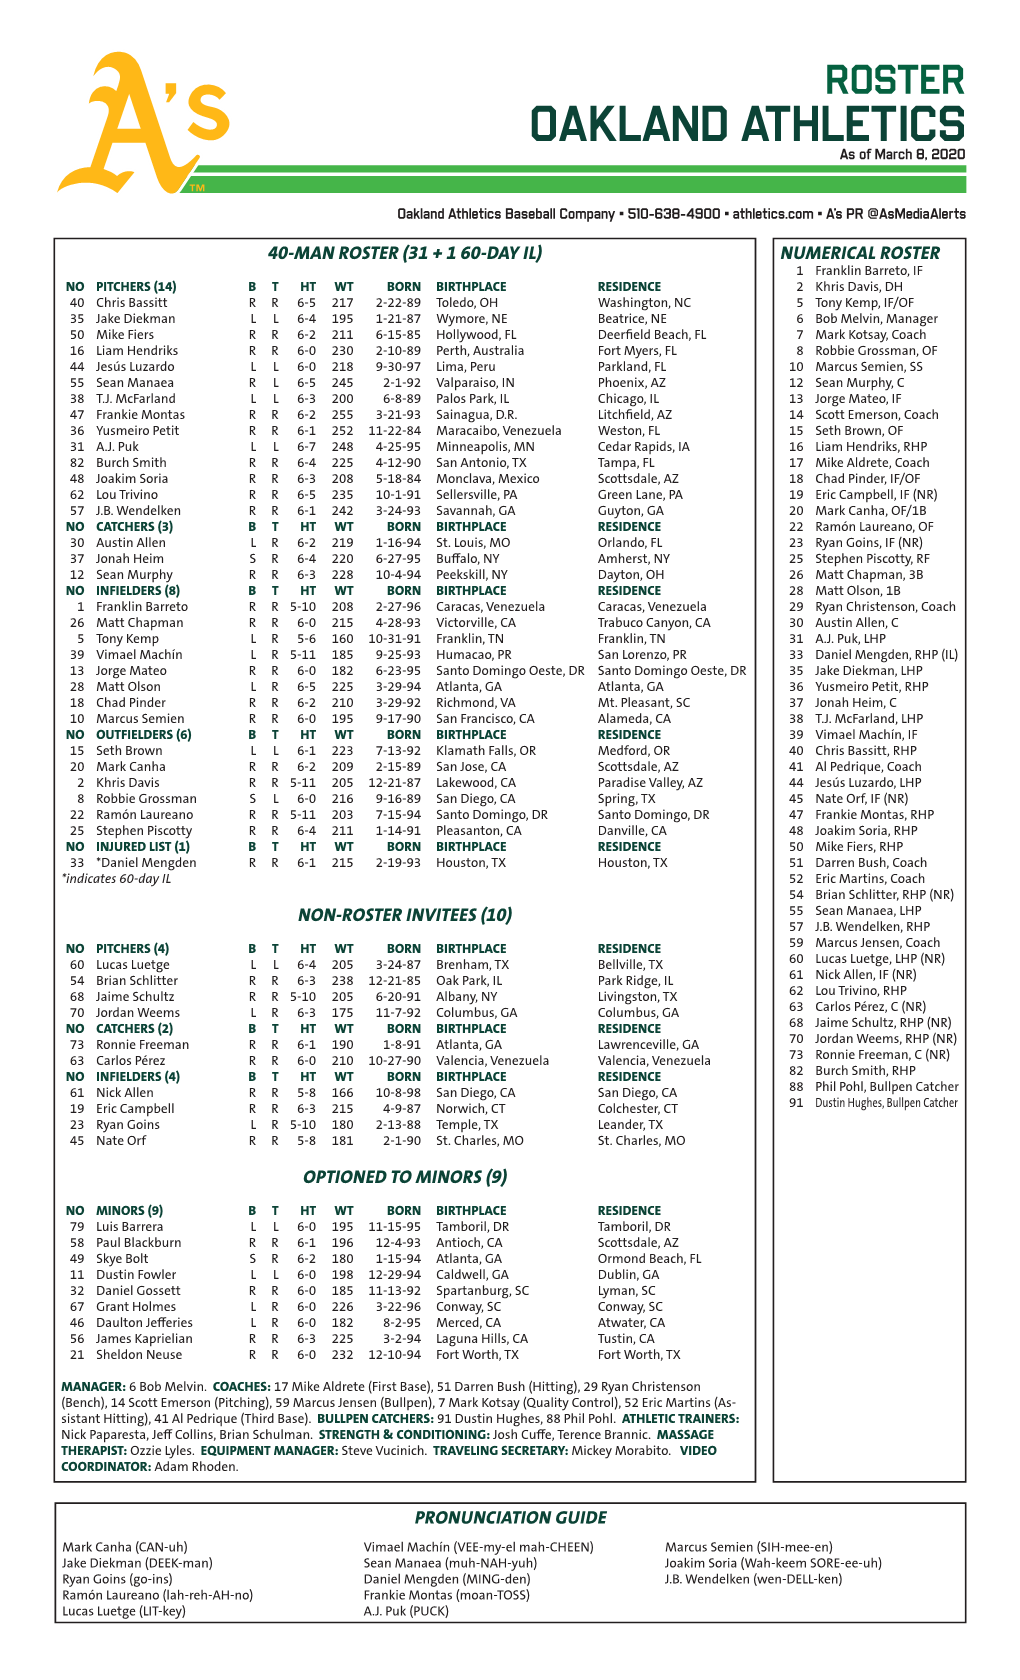 03-08-2020 A's Roster